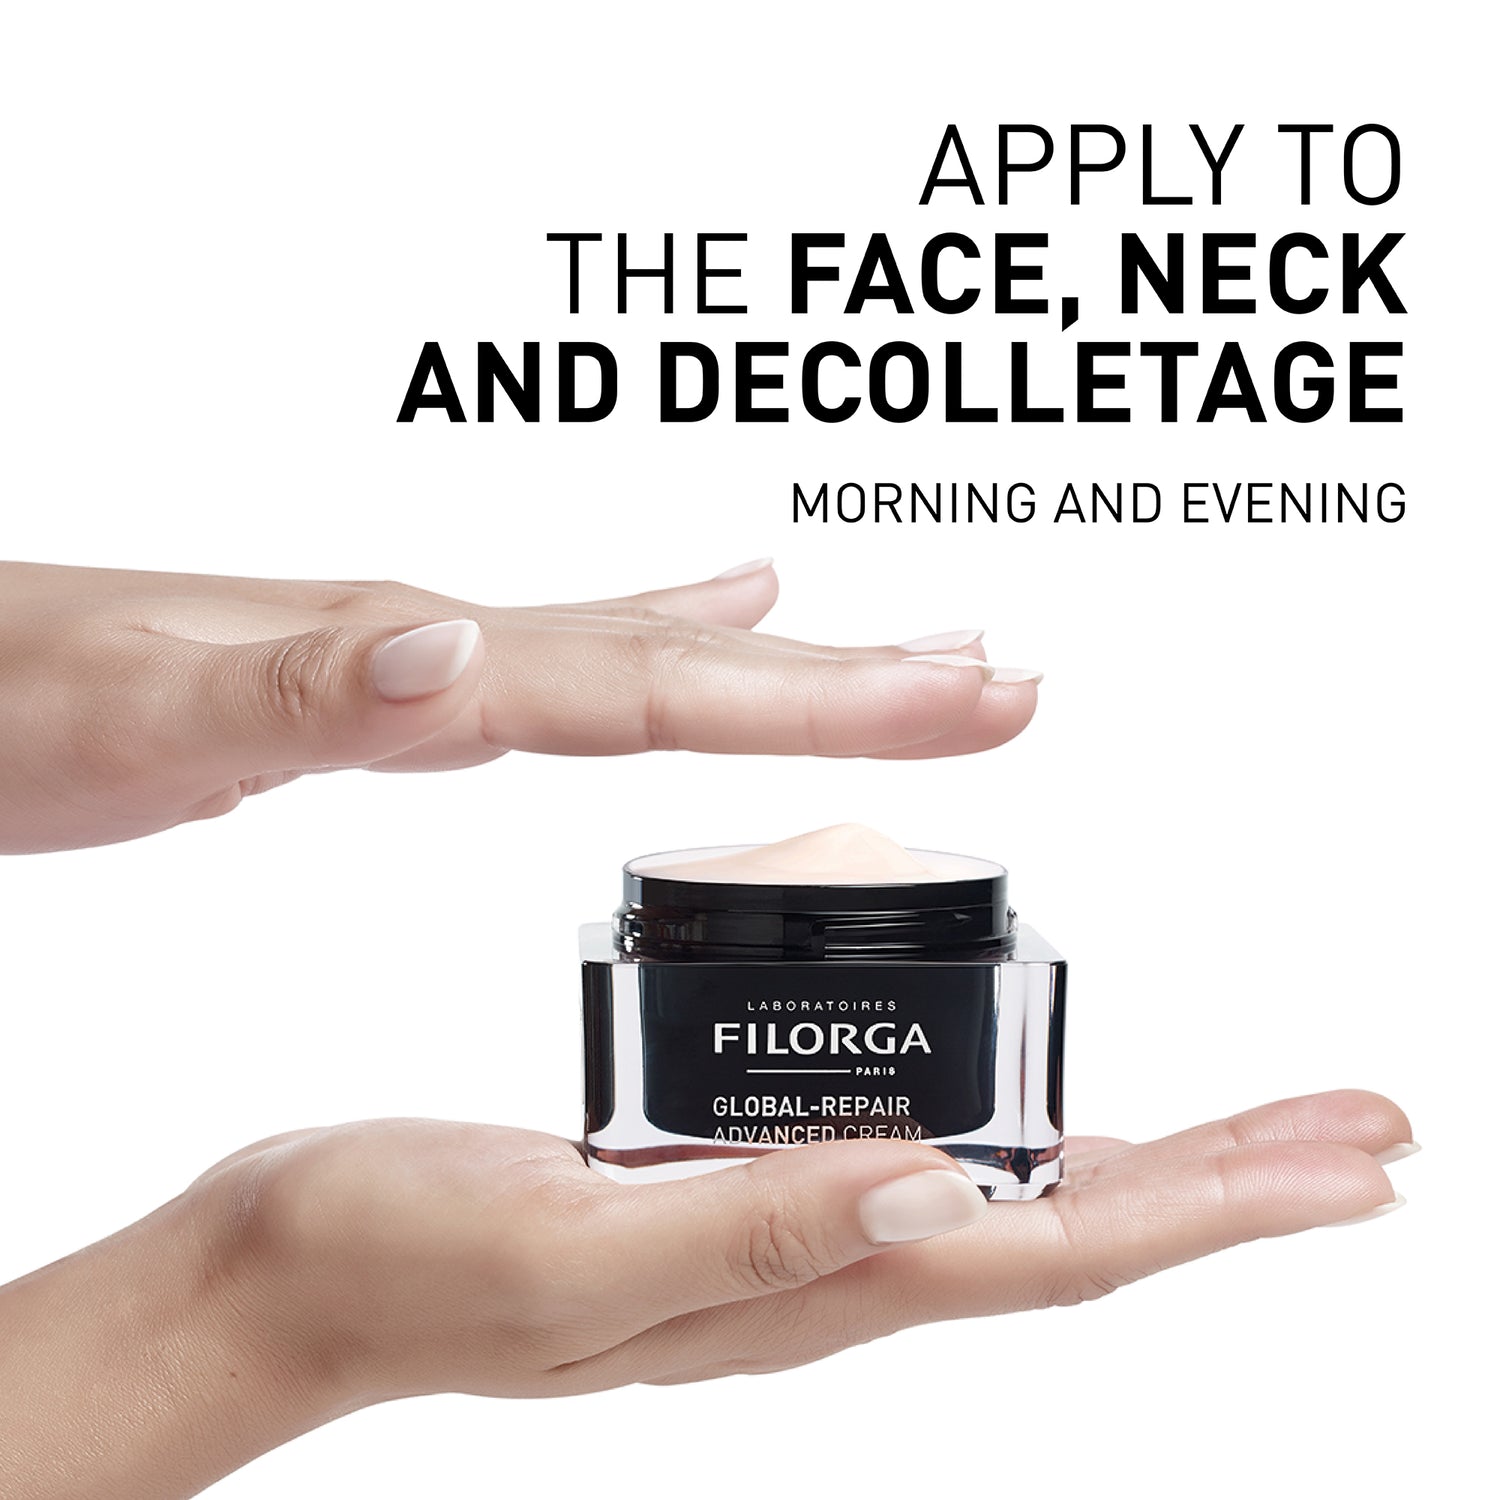 FILORGA GLOBAL-REPAIR ADVANCED CREAM apply to face neck and decolletage morning and evening